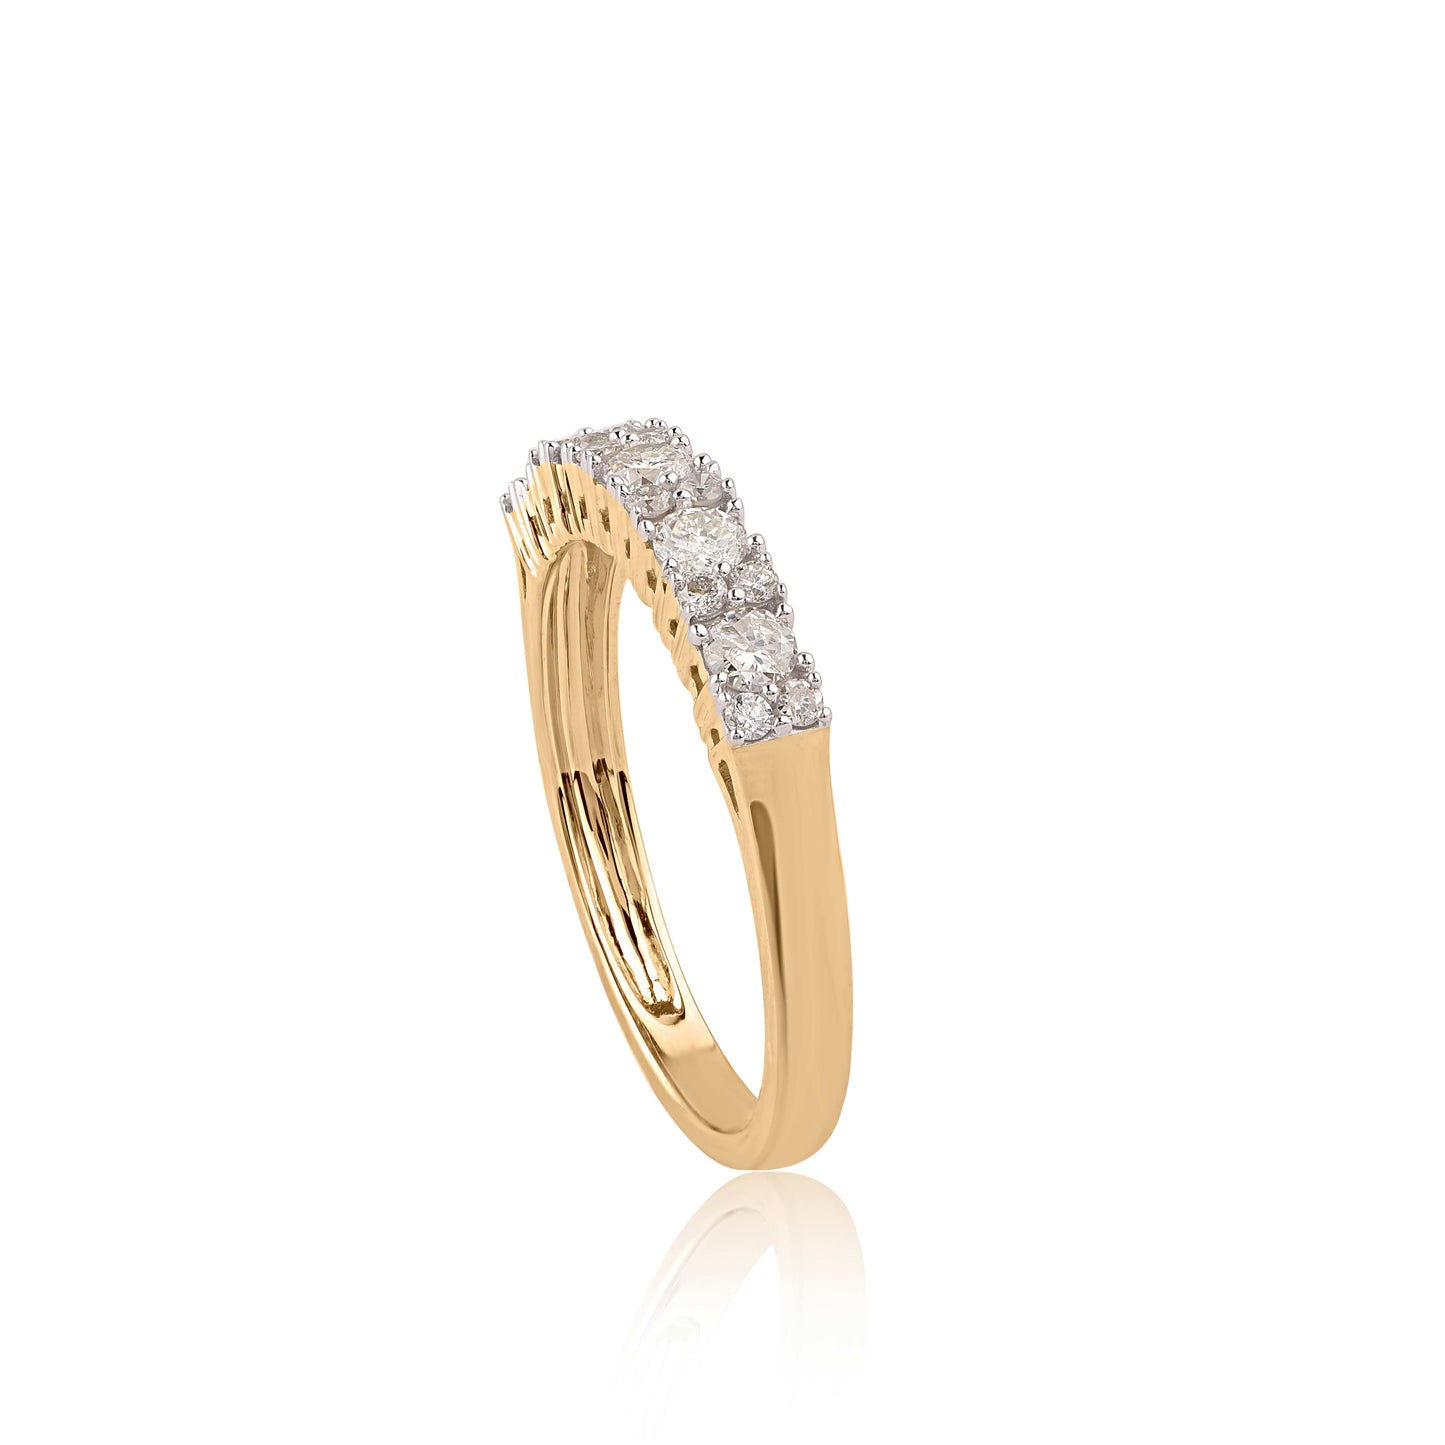 Diamond Engagement Band Ring in 10K Yellow Gold